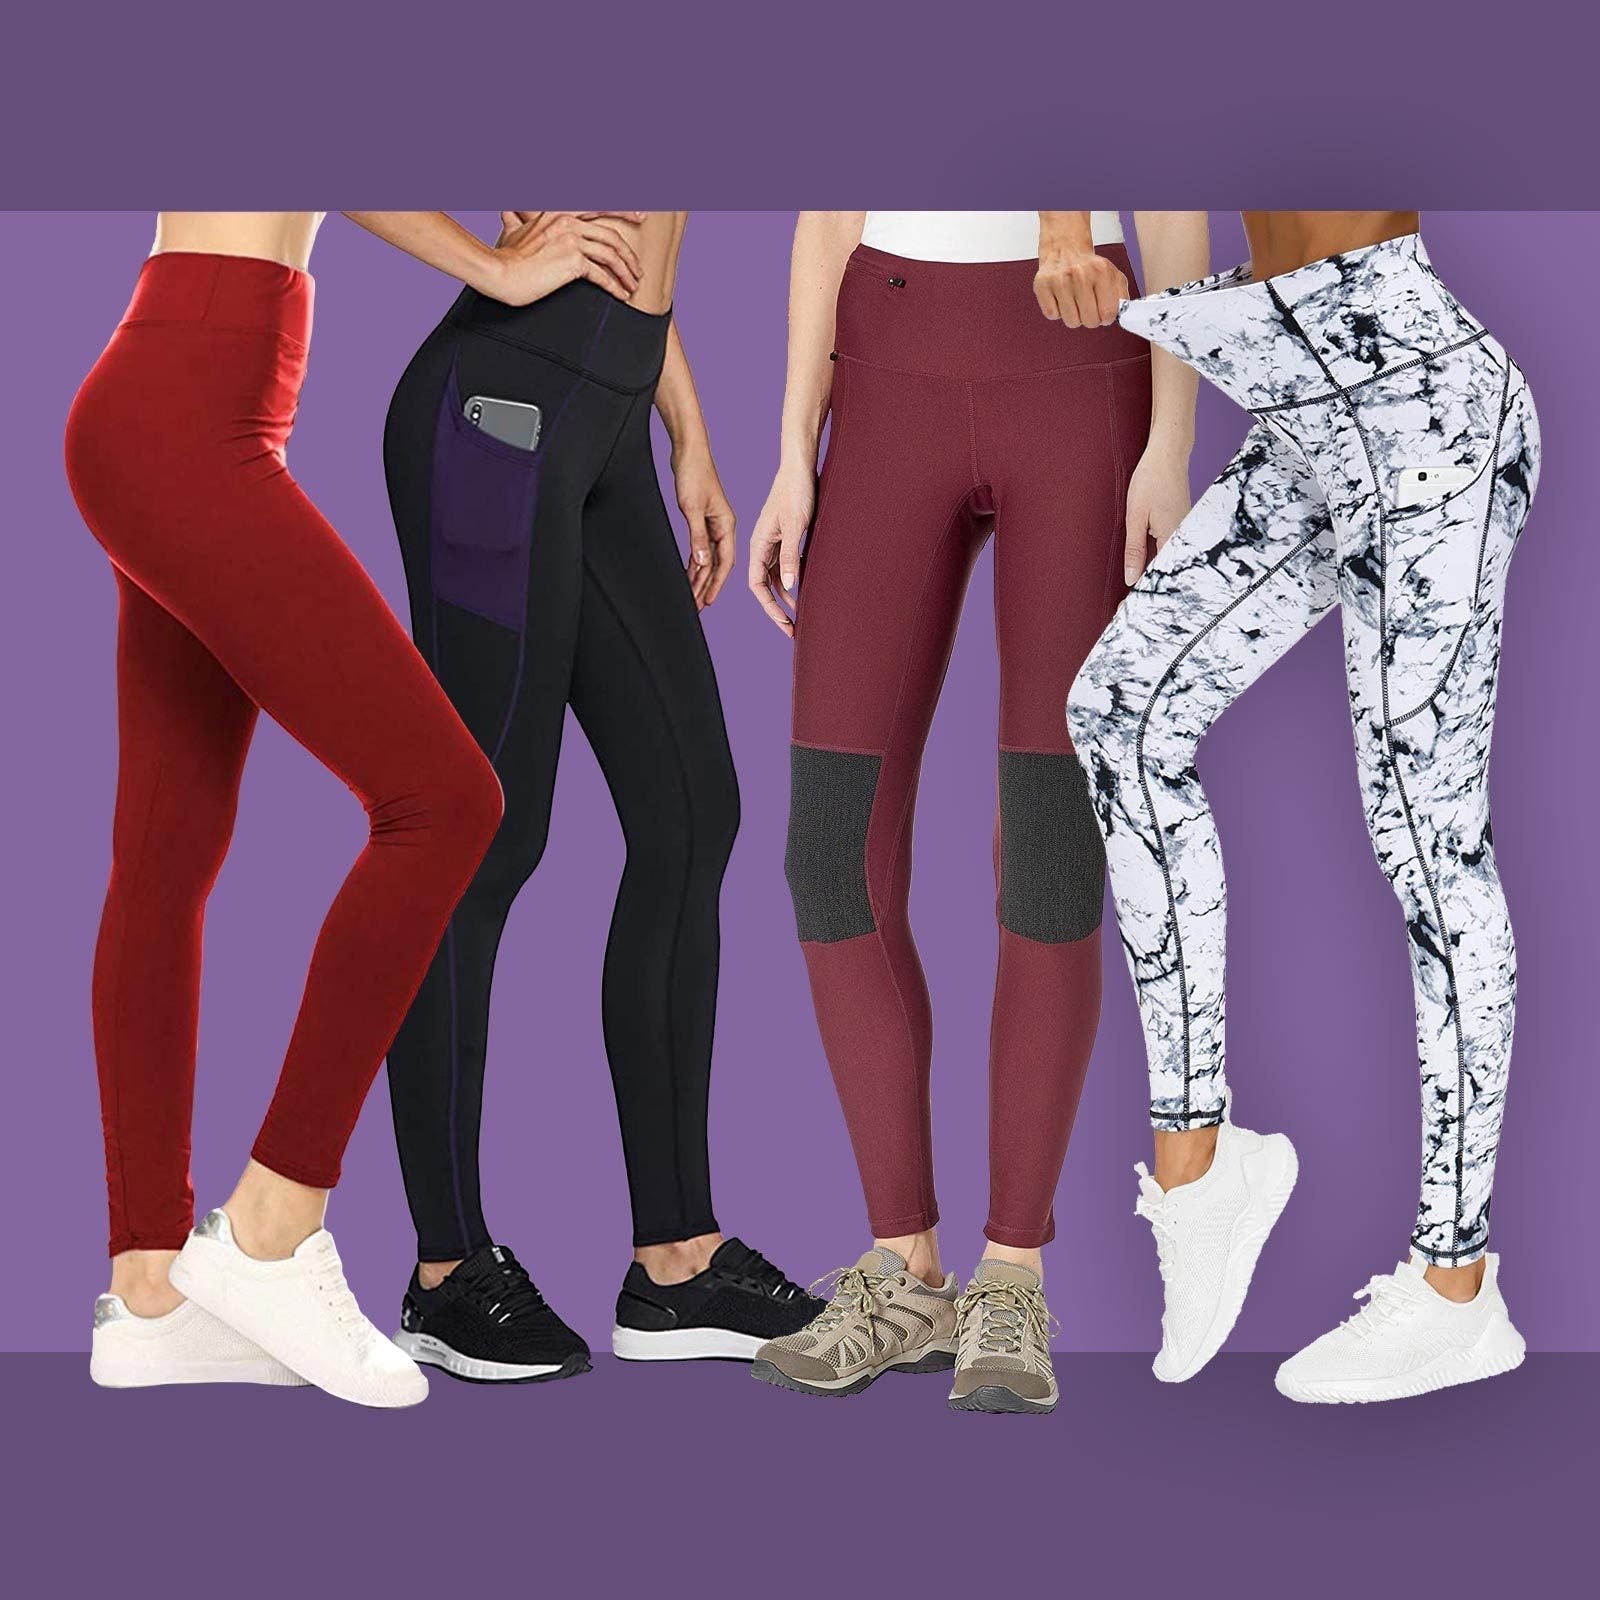 Leggings vs Tights vs Yoga Pants: What's the Difference? | Be Blog